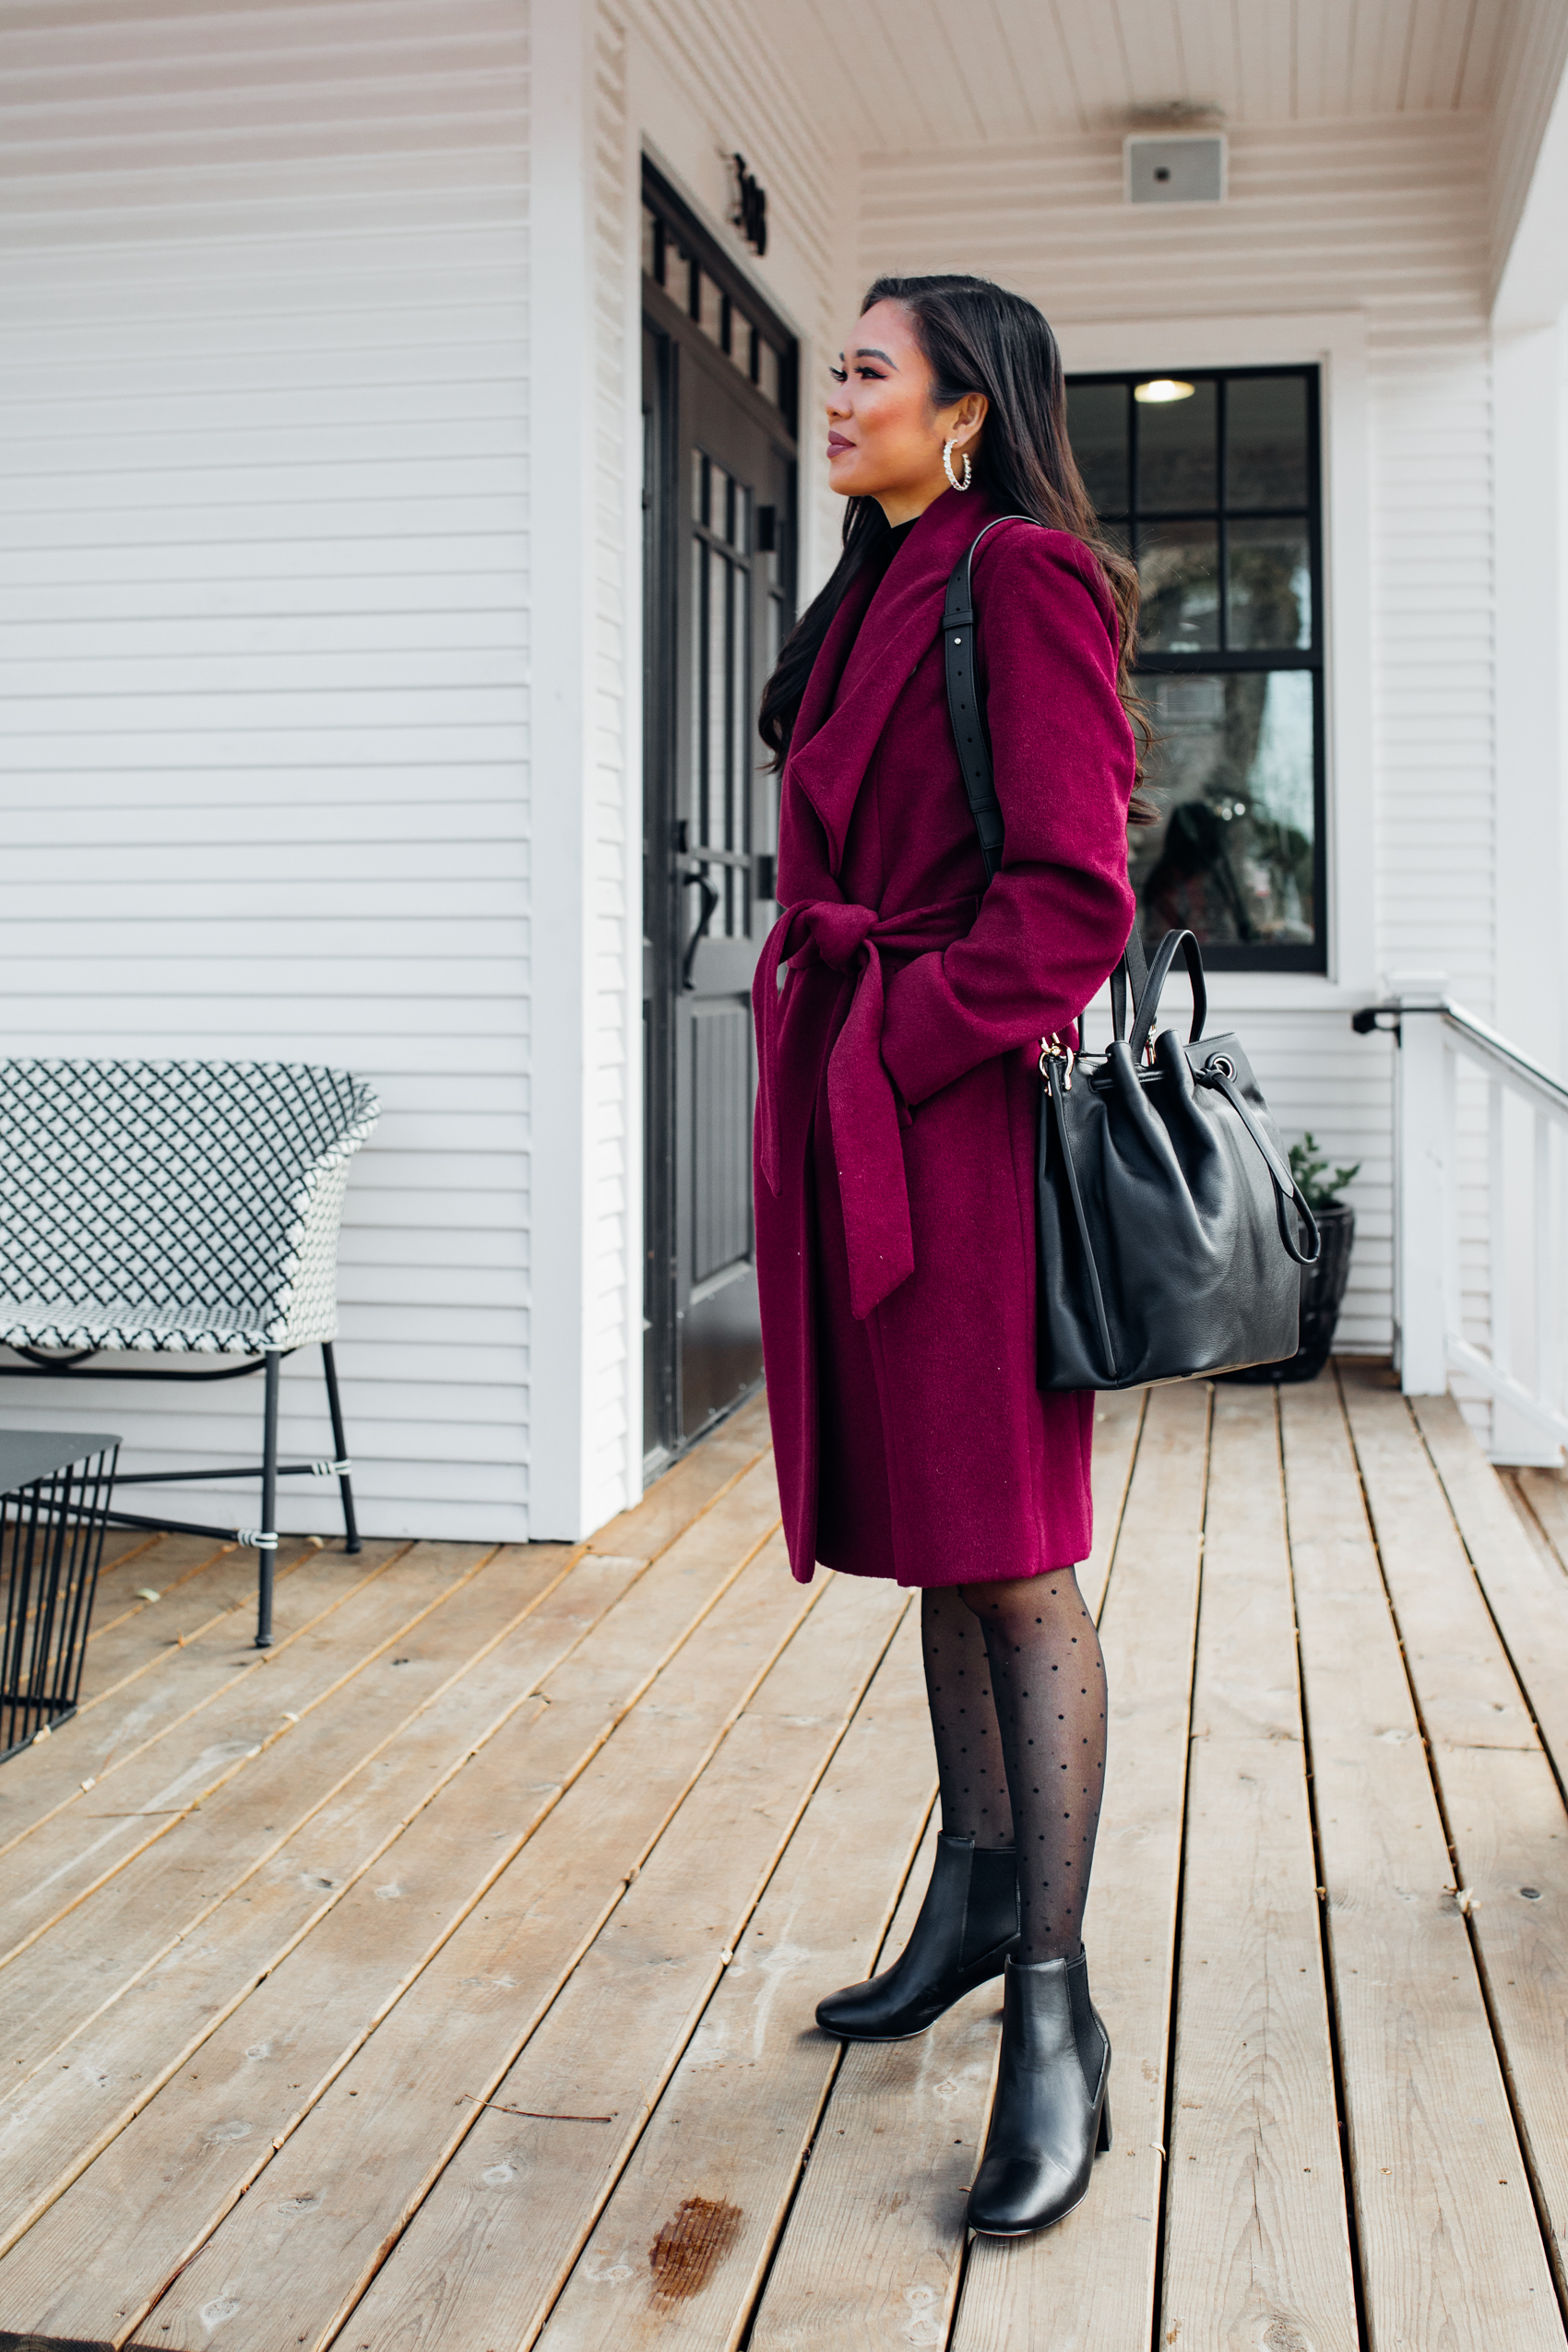 Luxury gifts for women without the price tag - blogger Hoang-Kim styles a wool wrap coat